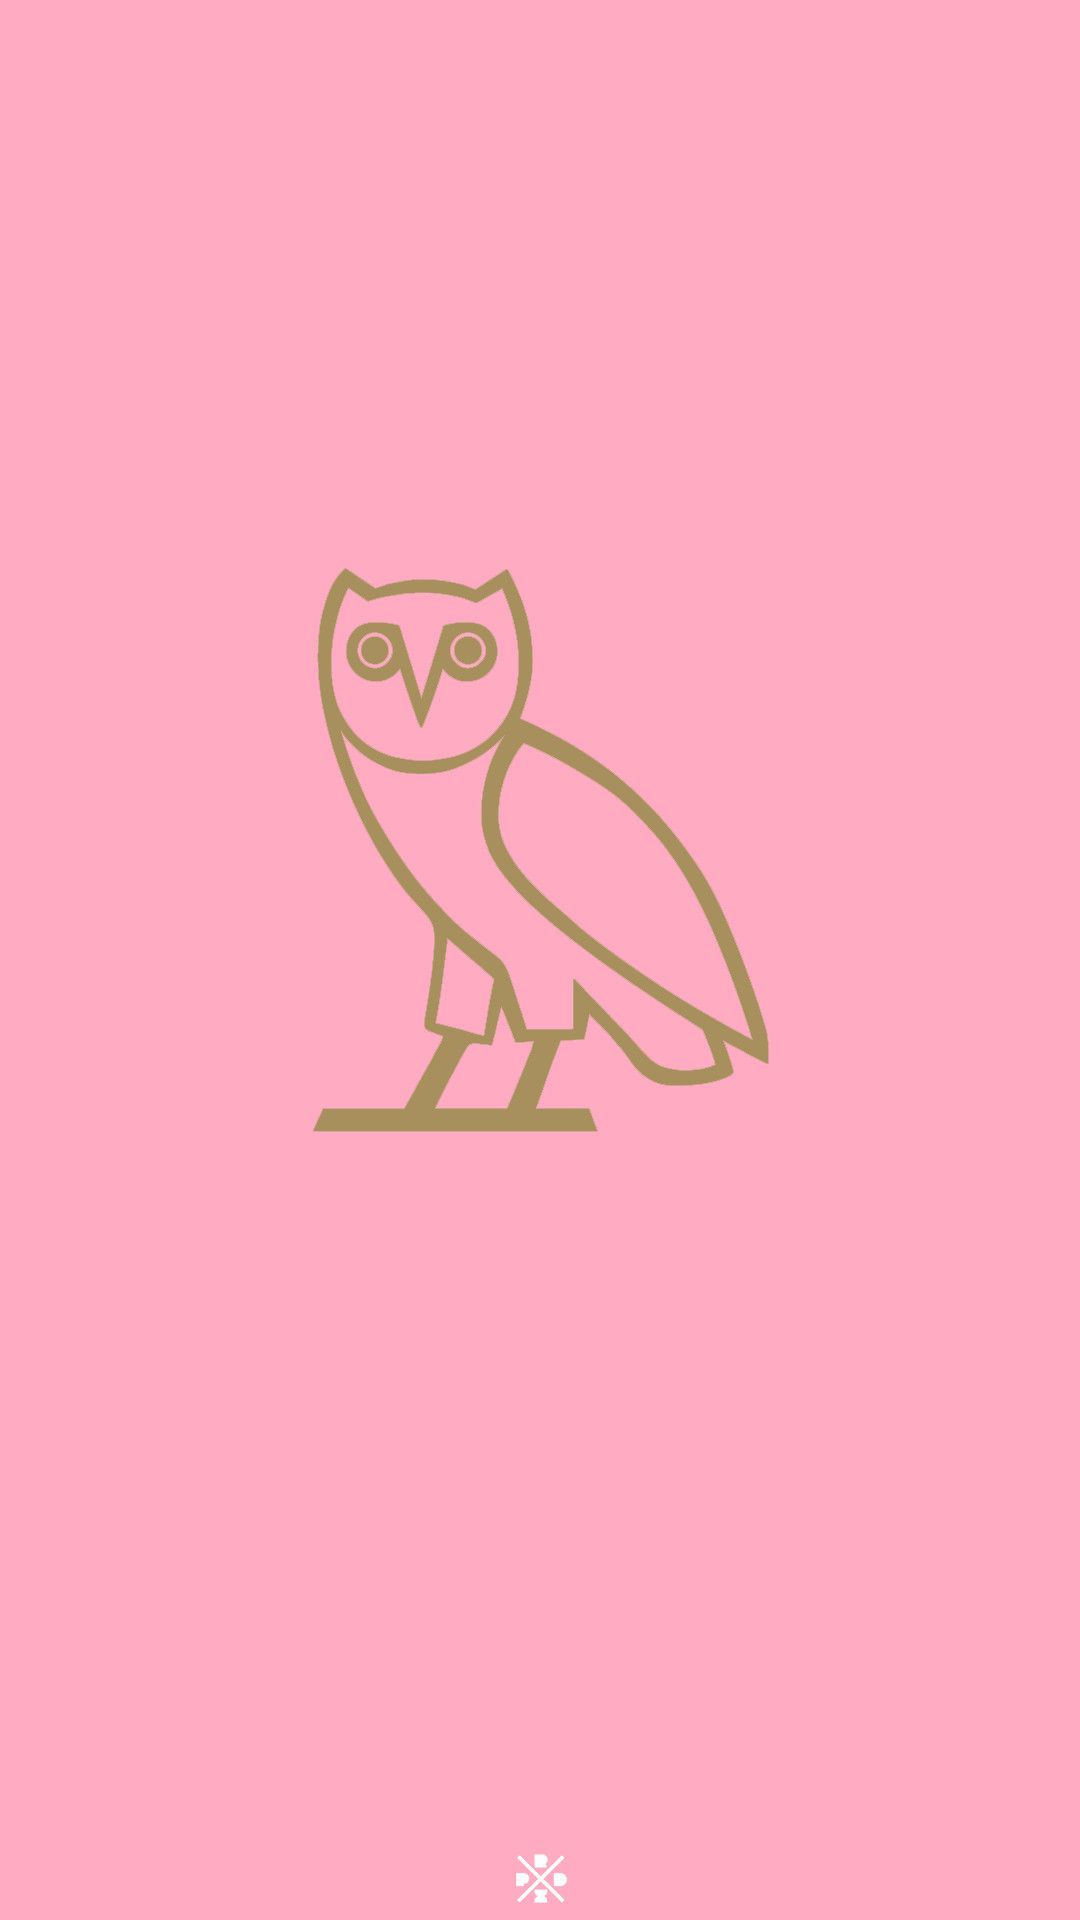 Ovo Iphone 6 Wallpapers